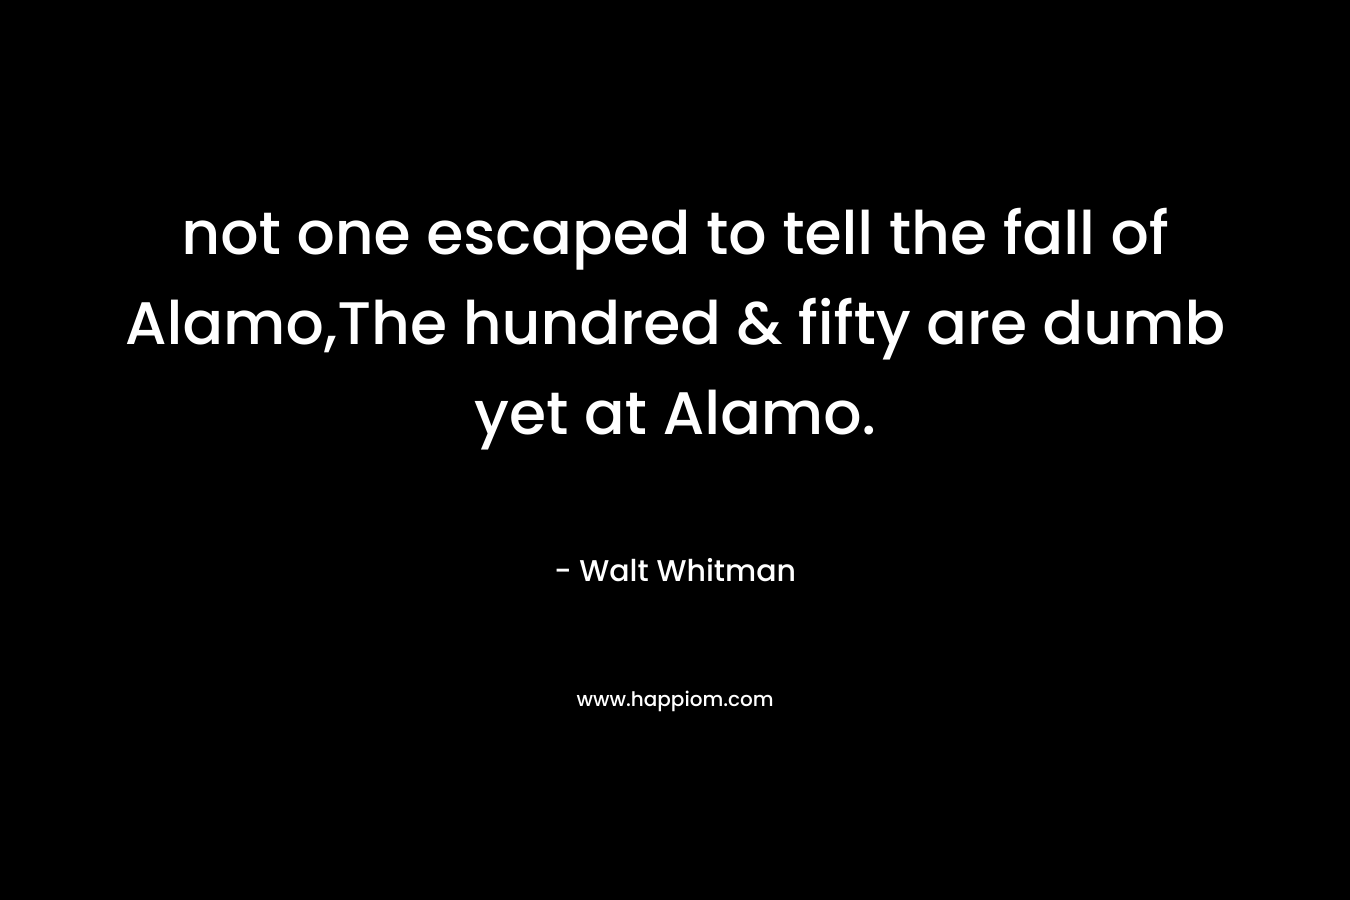 not one escaped to tell the fall of Alamo,The hundred & fifty are dumb yet at Alamo.